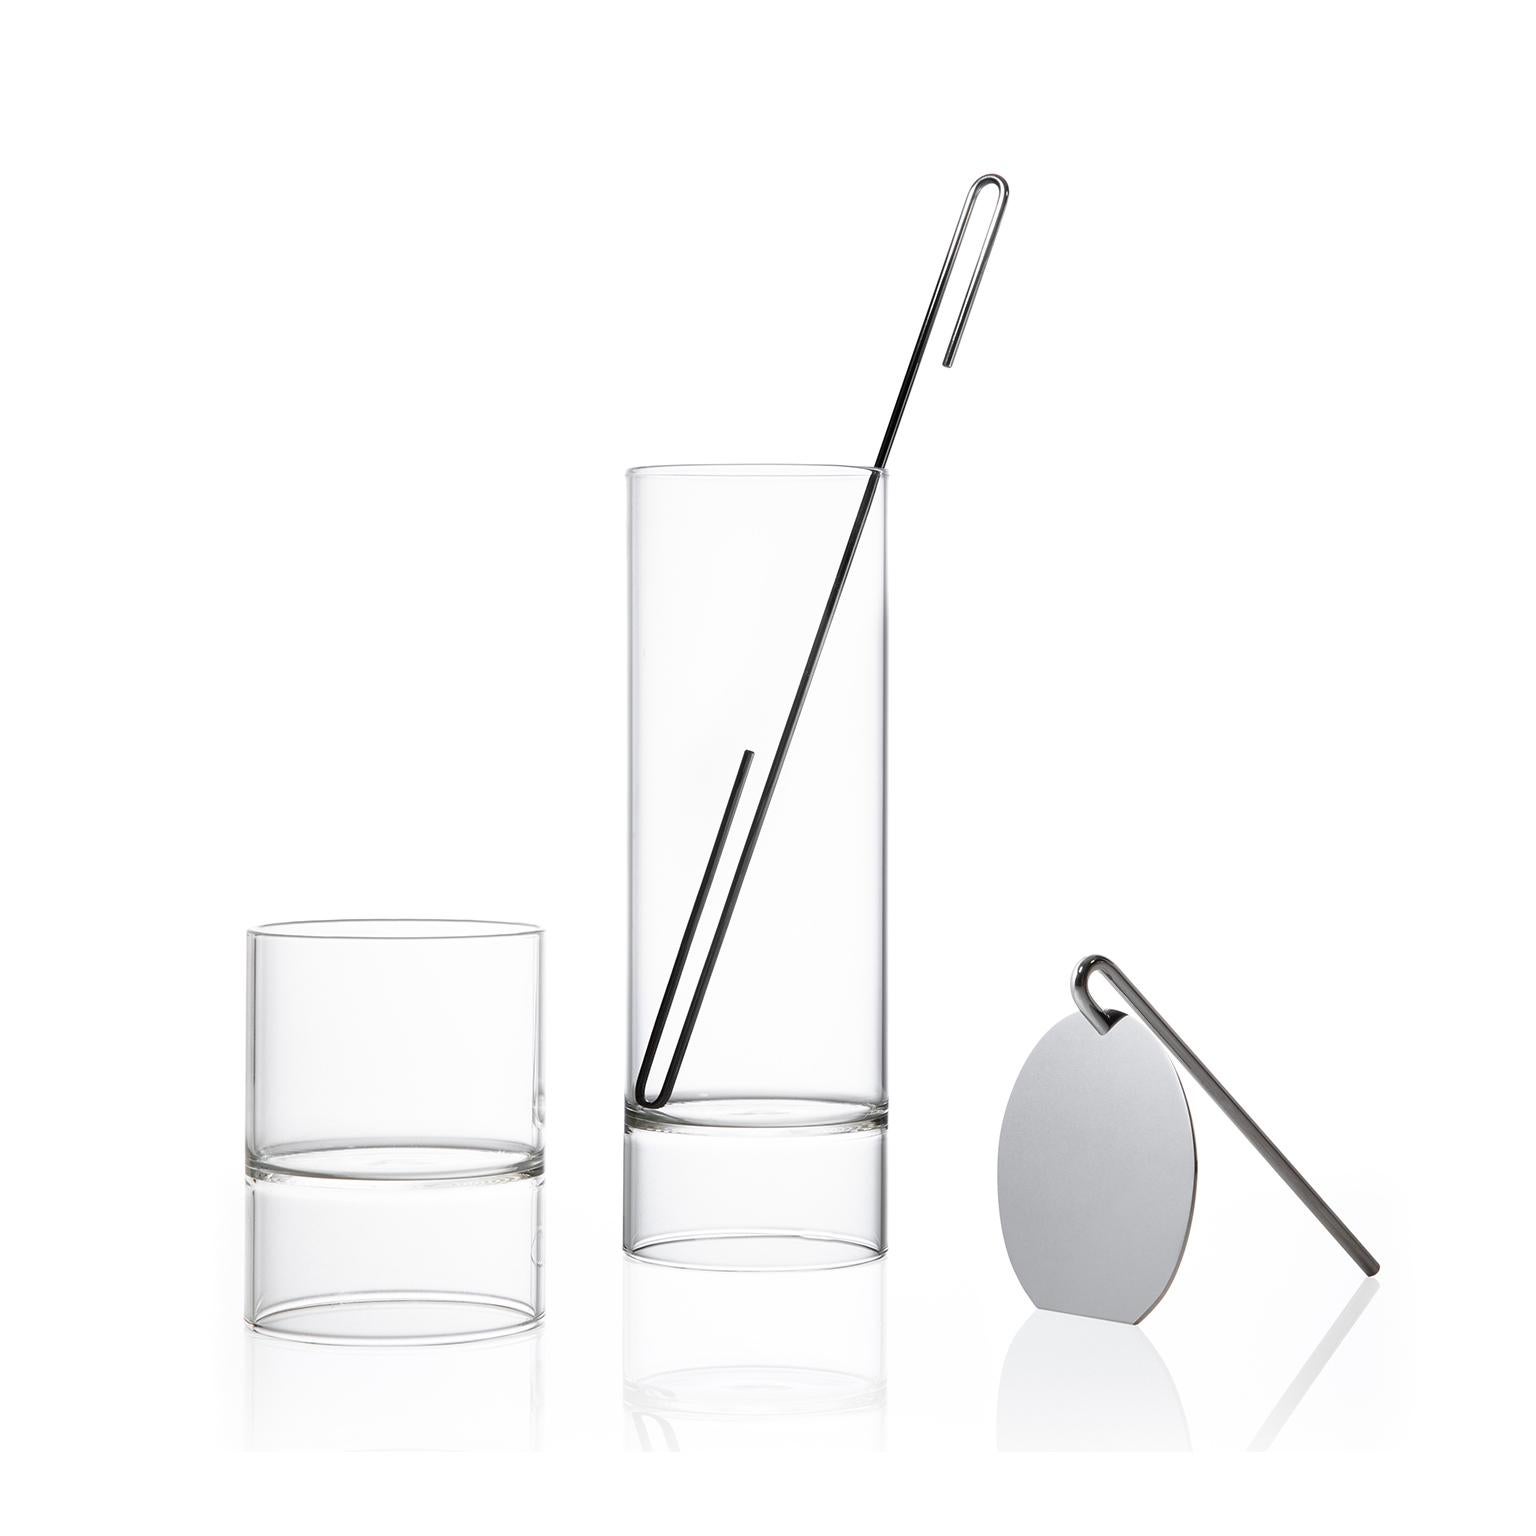 The contemporary Czech glass minimal Revolution collection set includes a cocktail mixer carafe, strainer, stir stick, and four double-ended Rocks Martini glasses.

Strikingly simple in form, the minimal Revolution collection is handcrafted in the